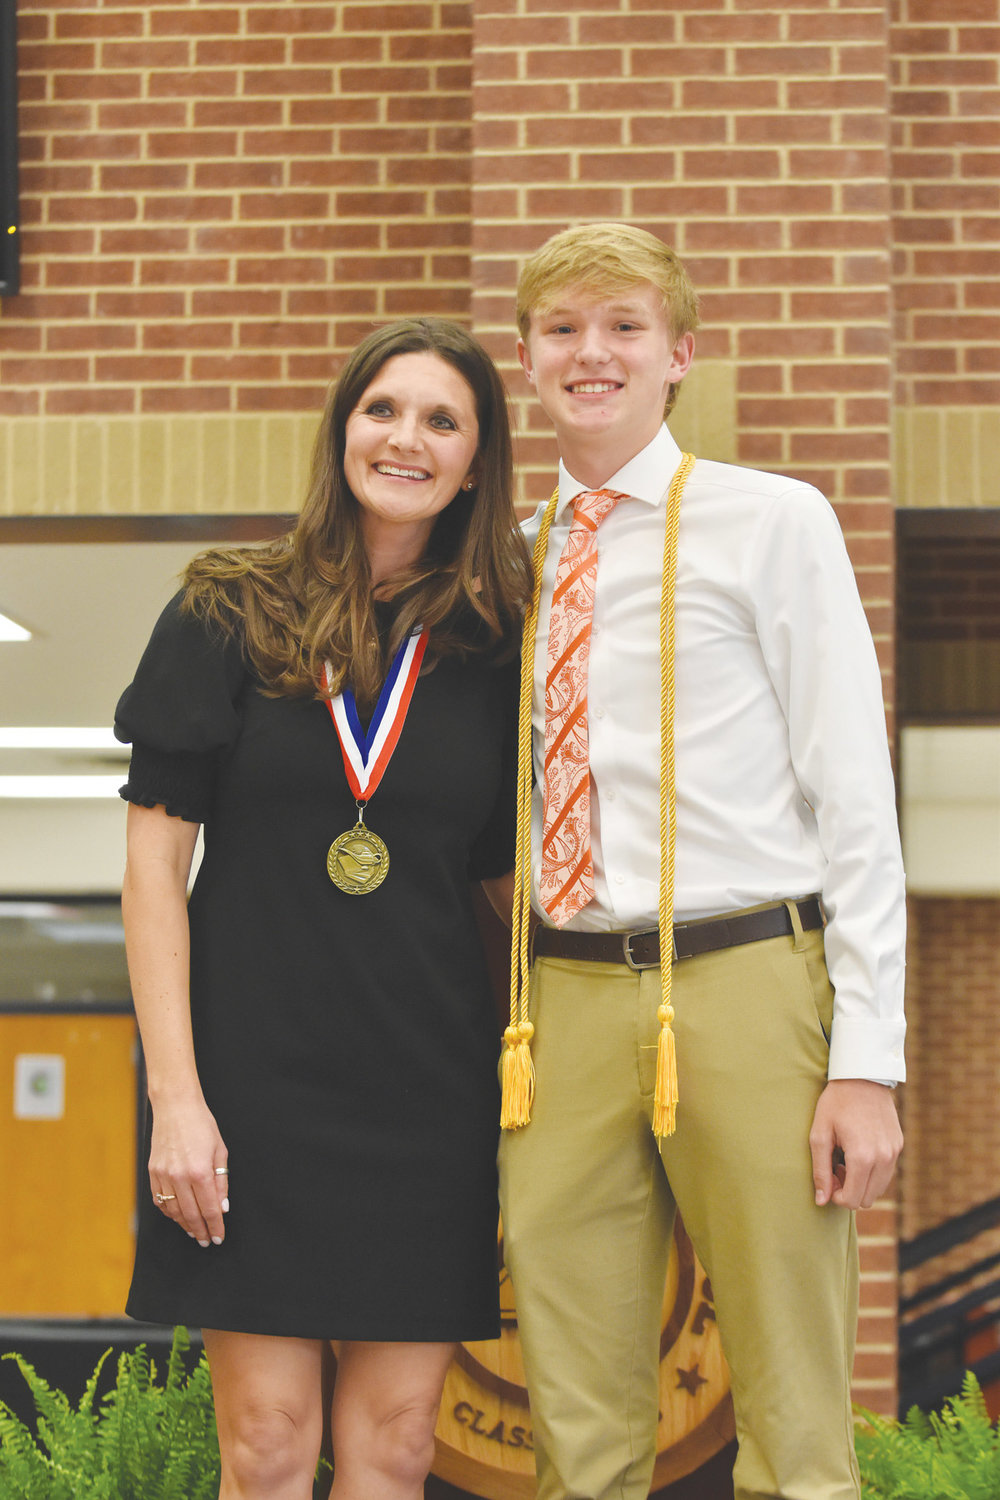 Blake Nuttall is the son of Tyler and Vallarie Nuttall. Blake plans to attend BYU, major in finance, minor in sports management, and become a sports agent. He honored Mrs. Jamie Rinehart.